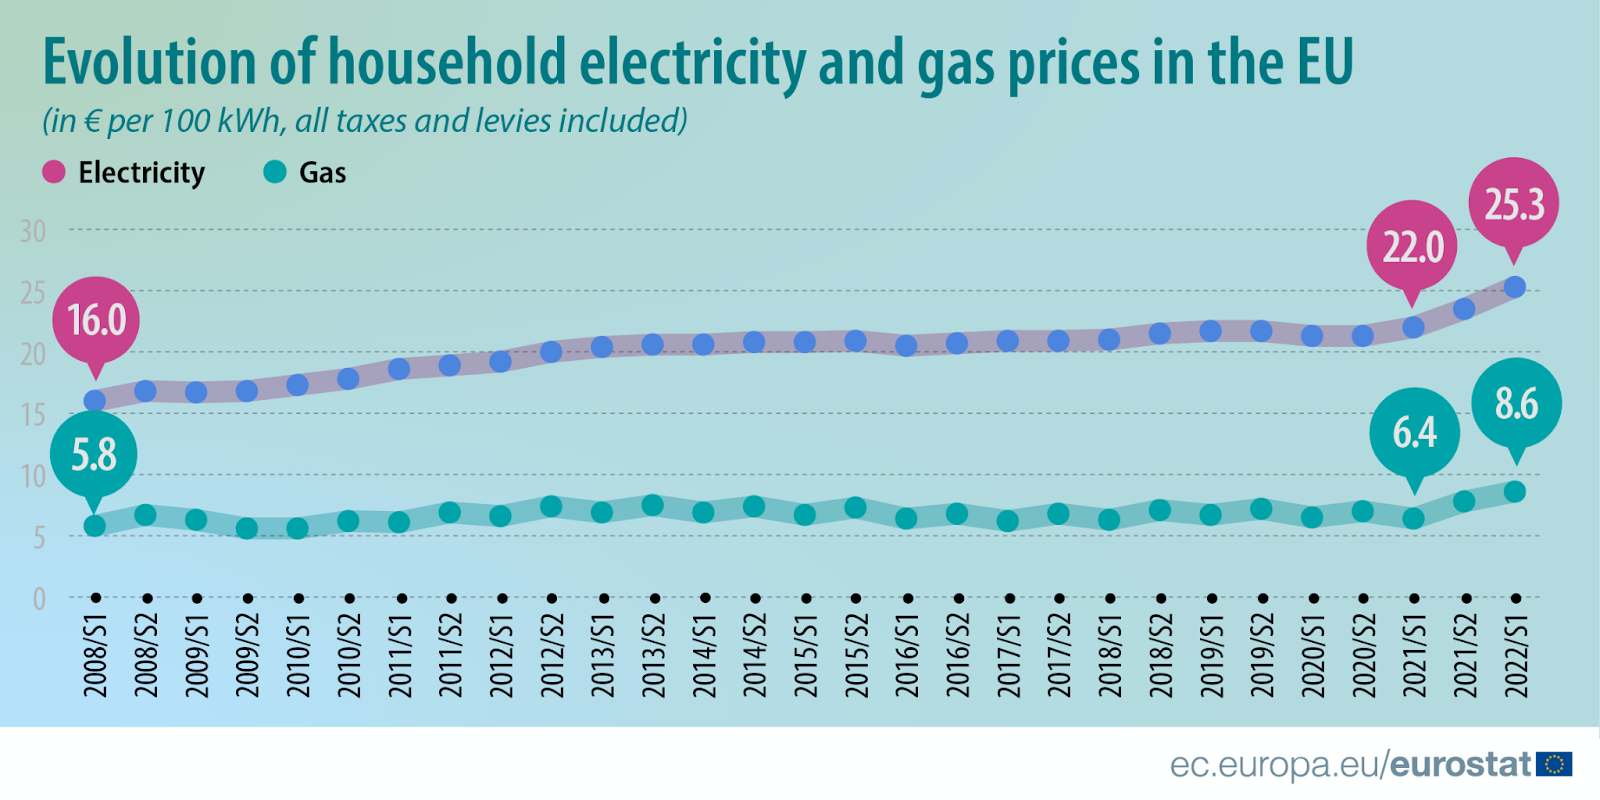 Evolution of household electricity and gas prices in the EU